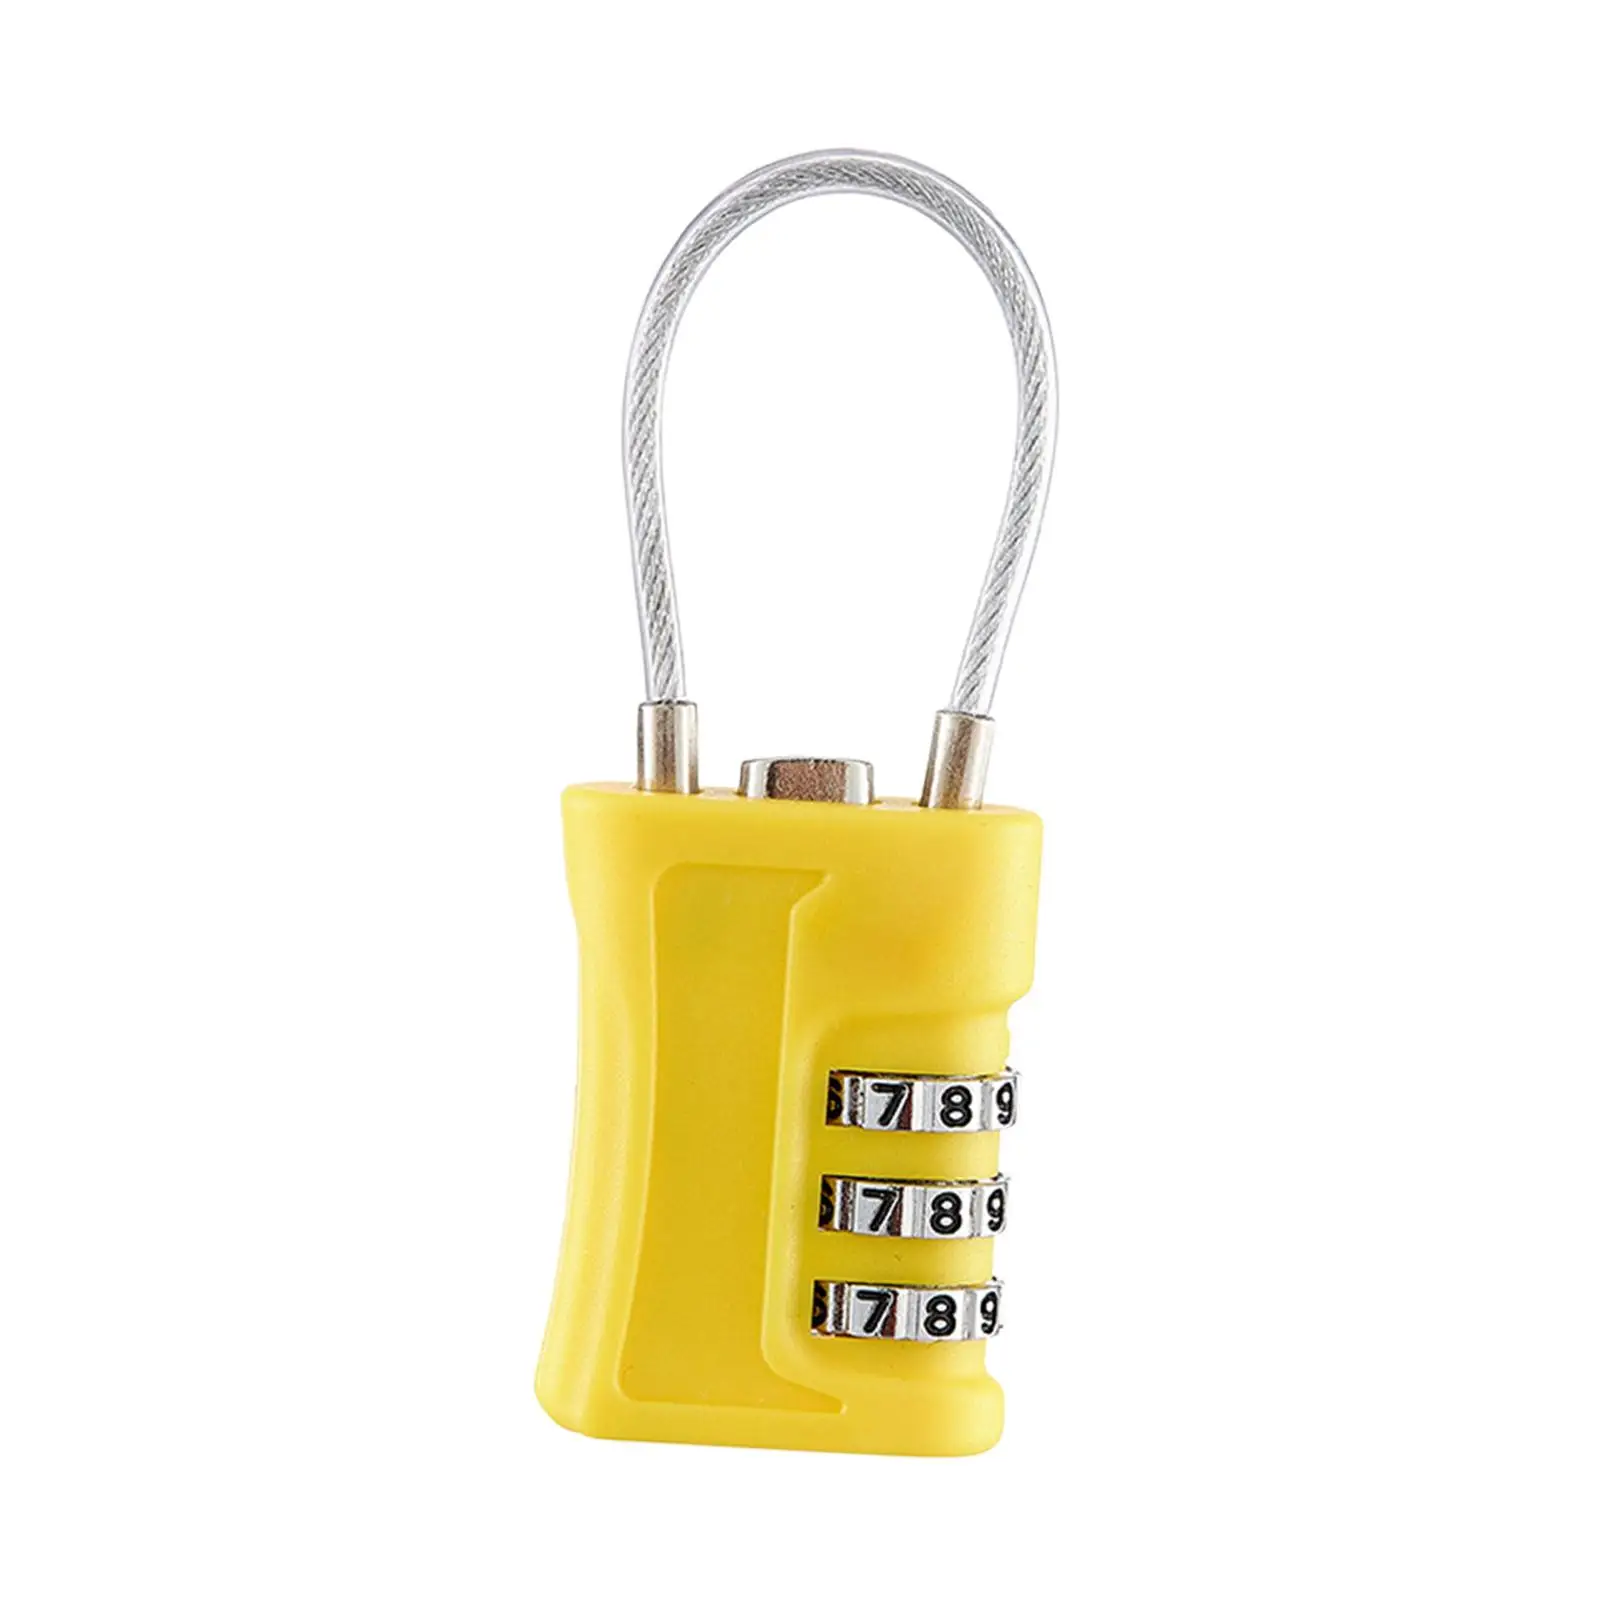 3 Digit Combination Lock Code Lock for Gym Bags Cabinet Storage Going Abroad